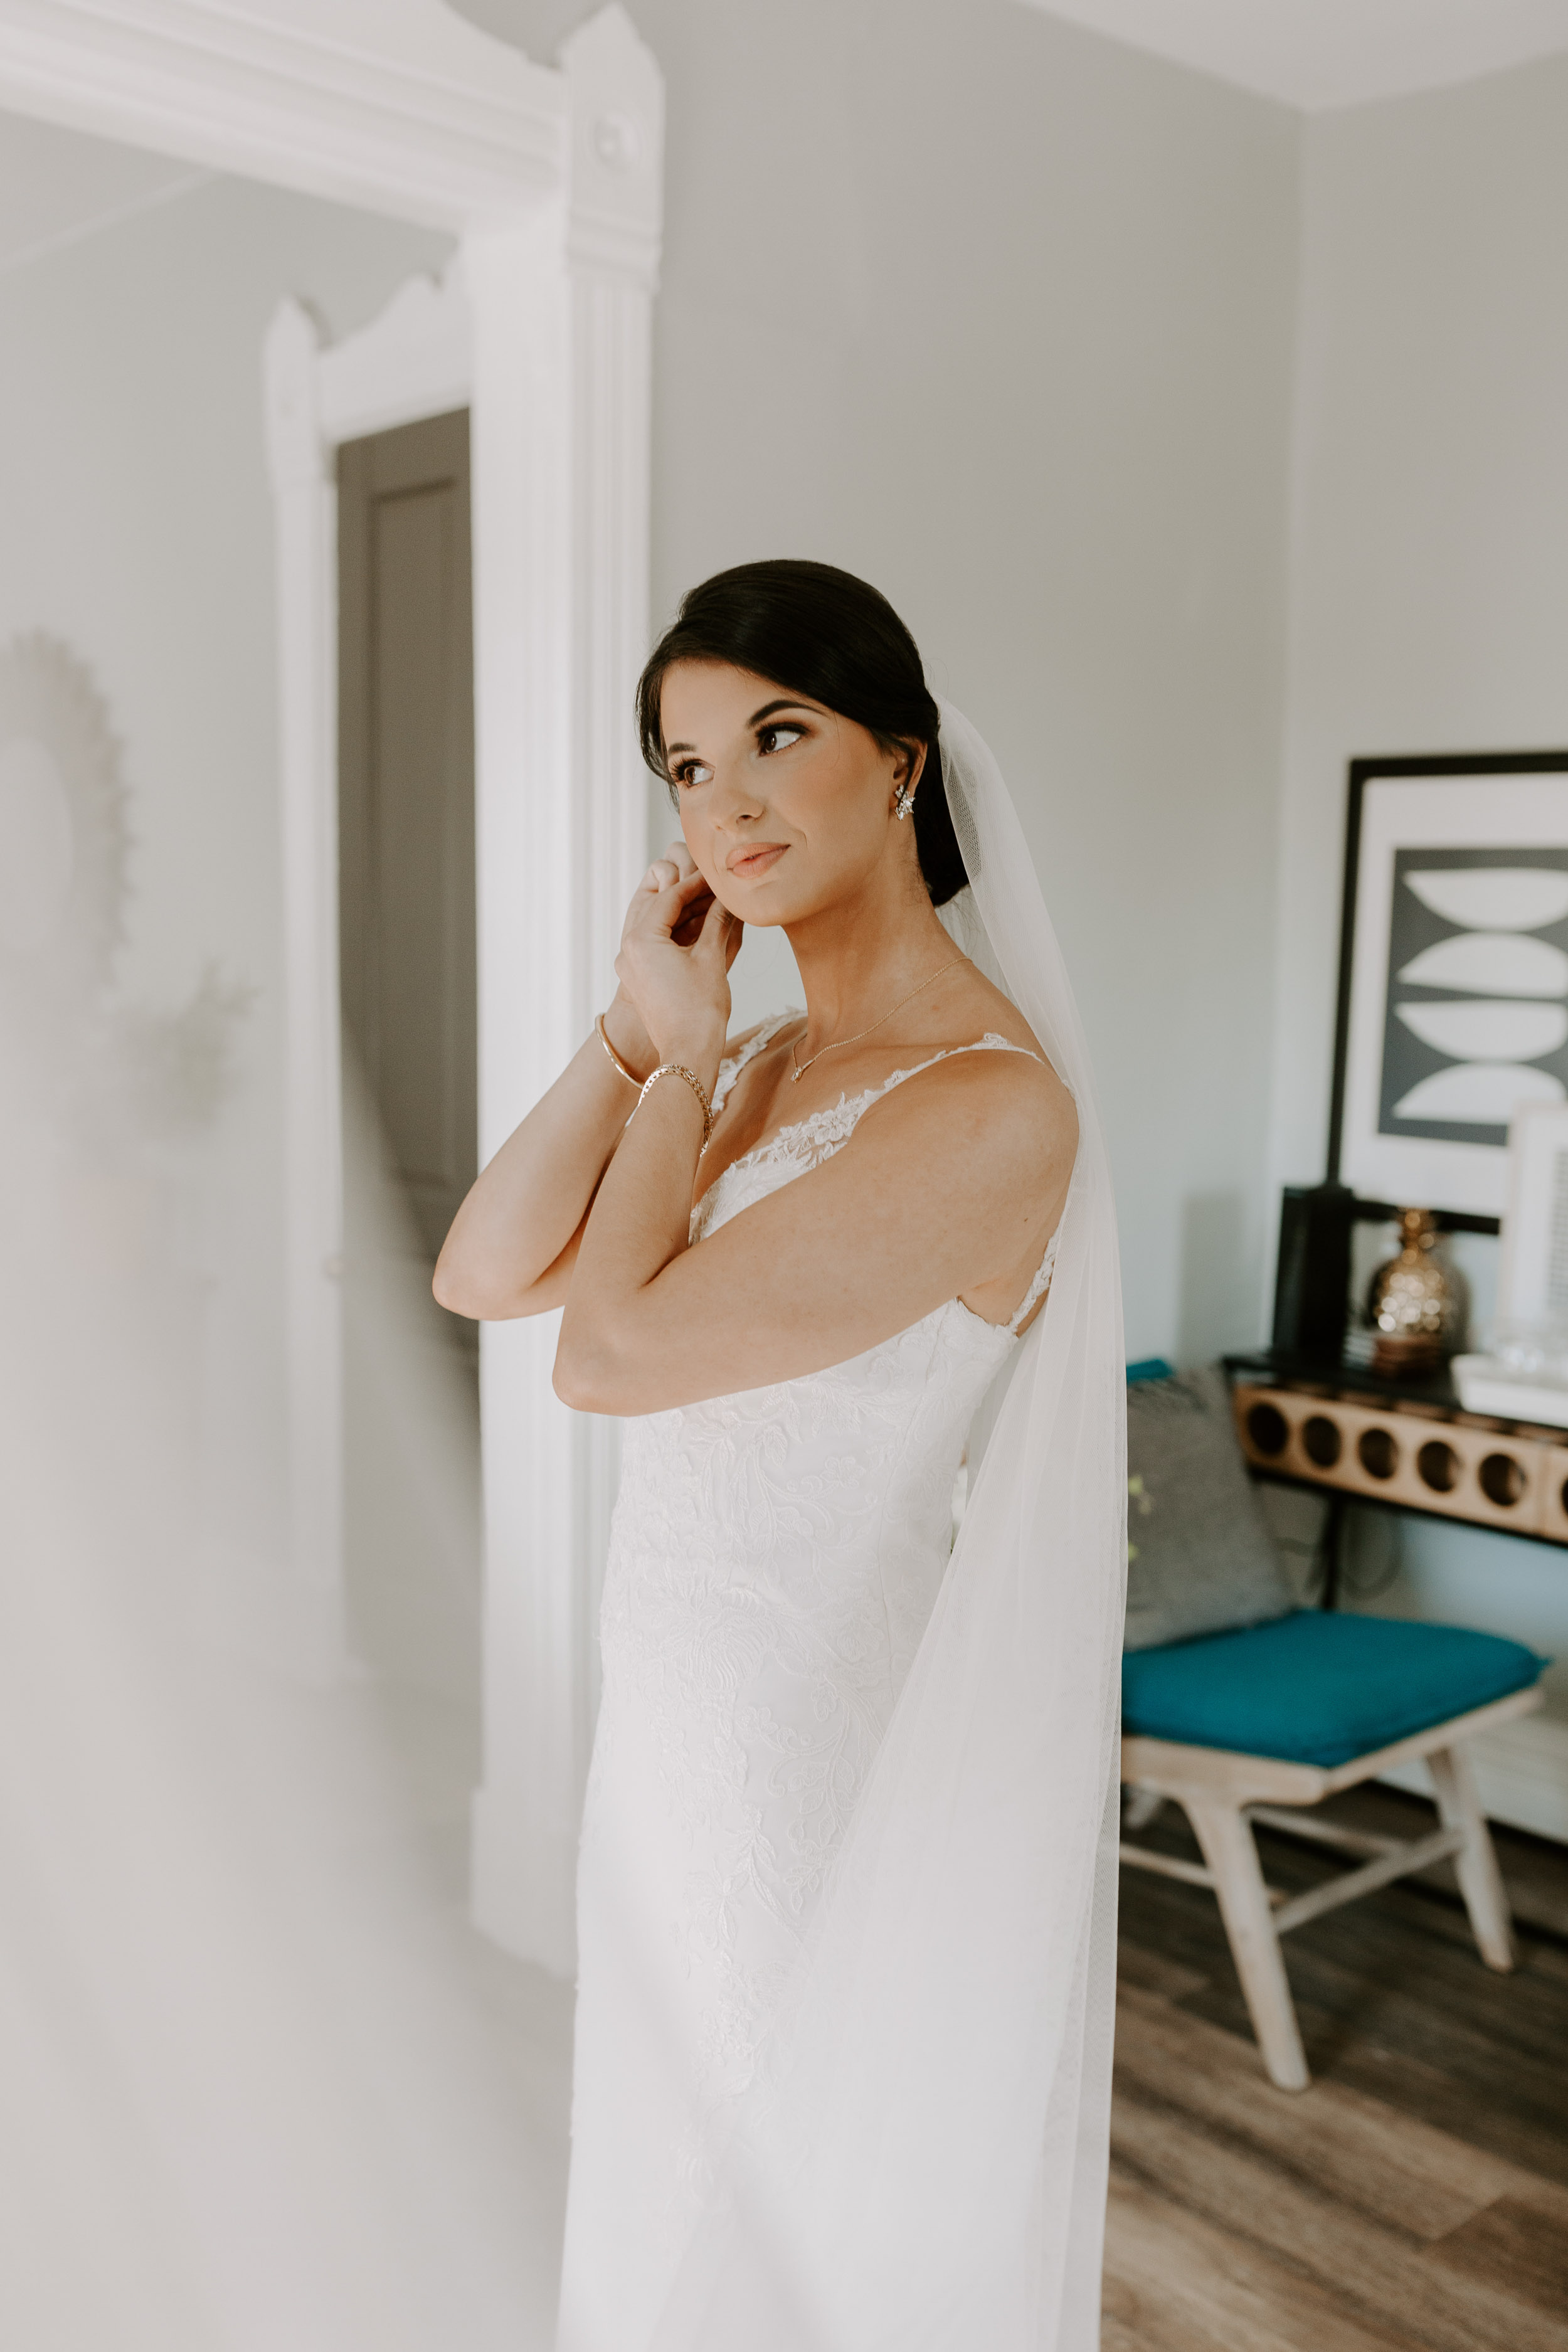 Getting ready for wedding photos | Bride putting on earrings